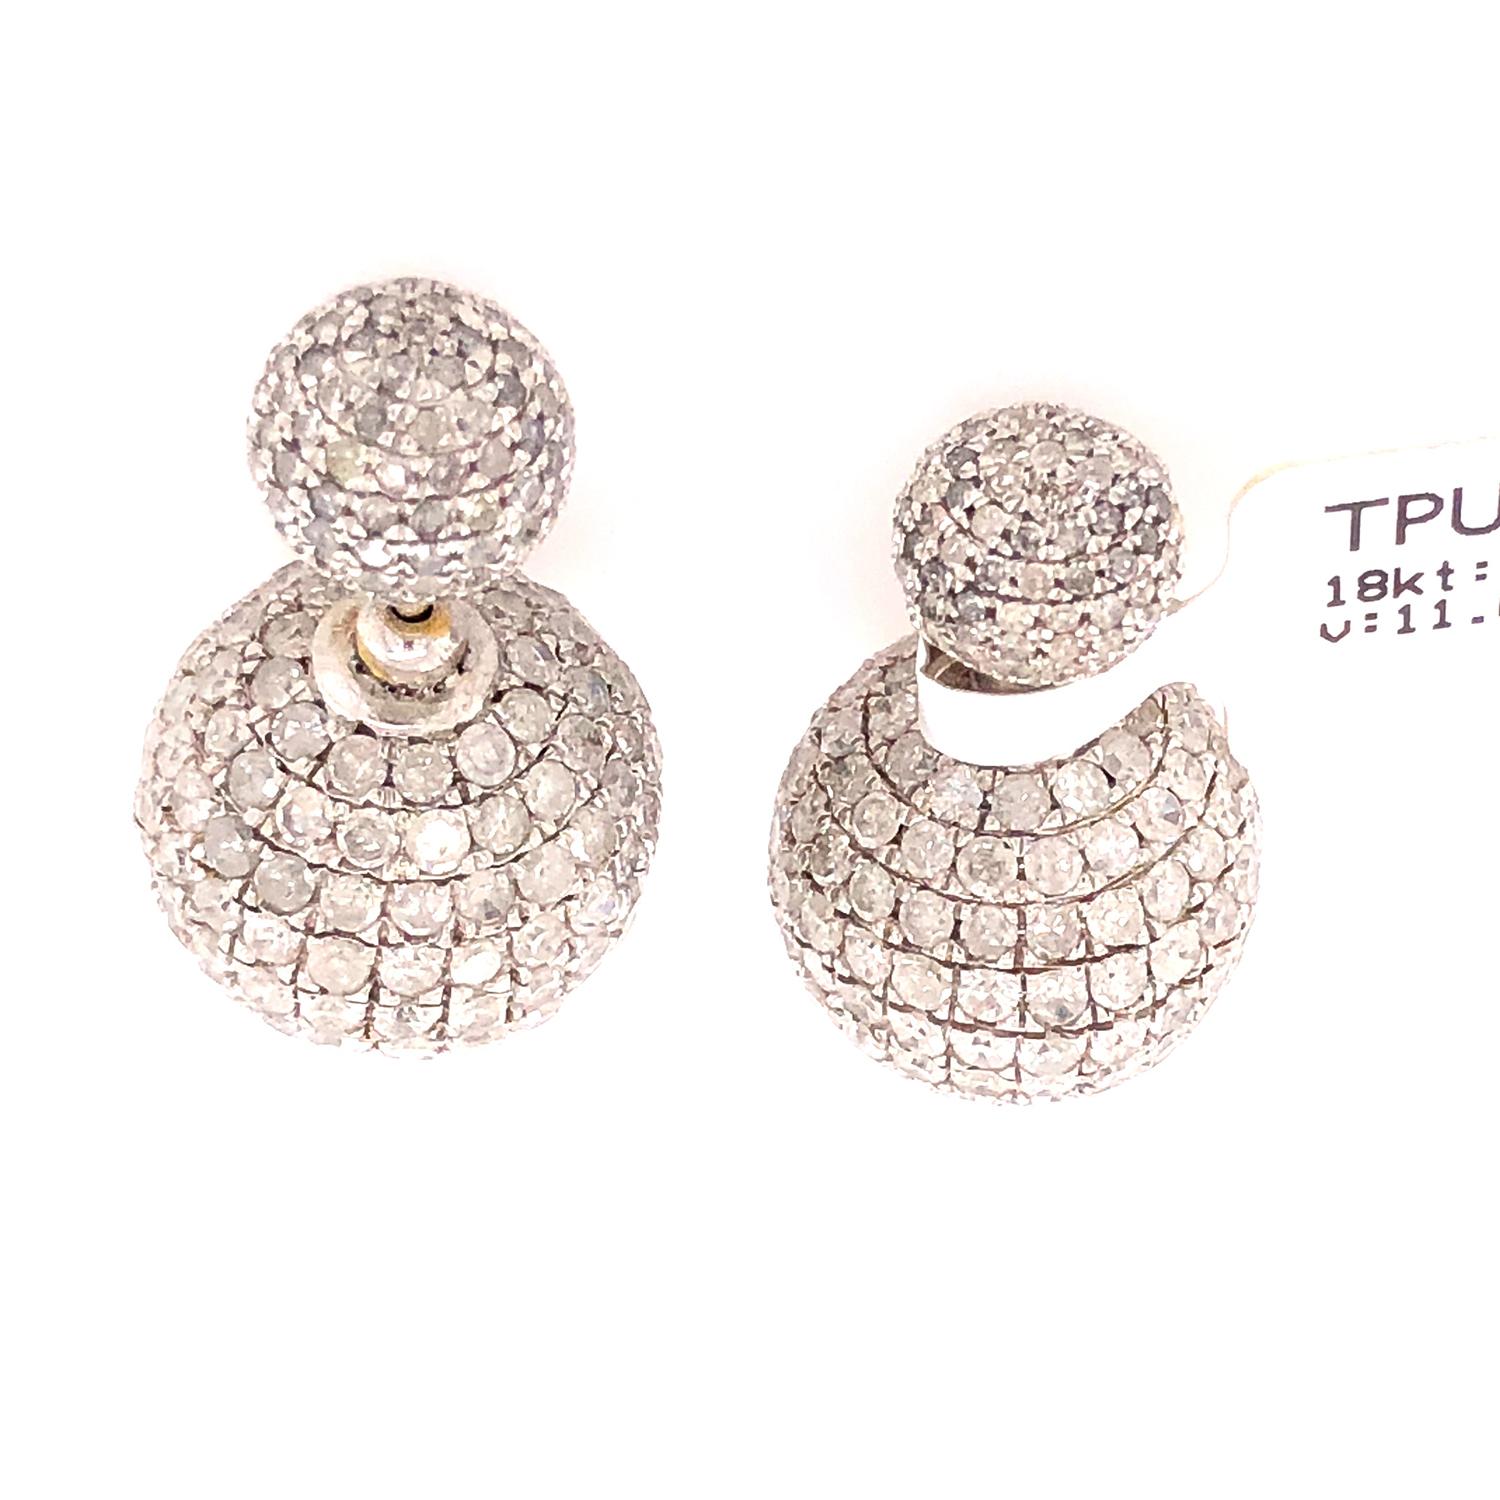 Art Deco White Pave Diamond Ball Earrings Made In 18k Gold & Silver For Sale